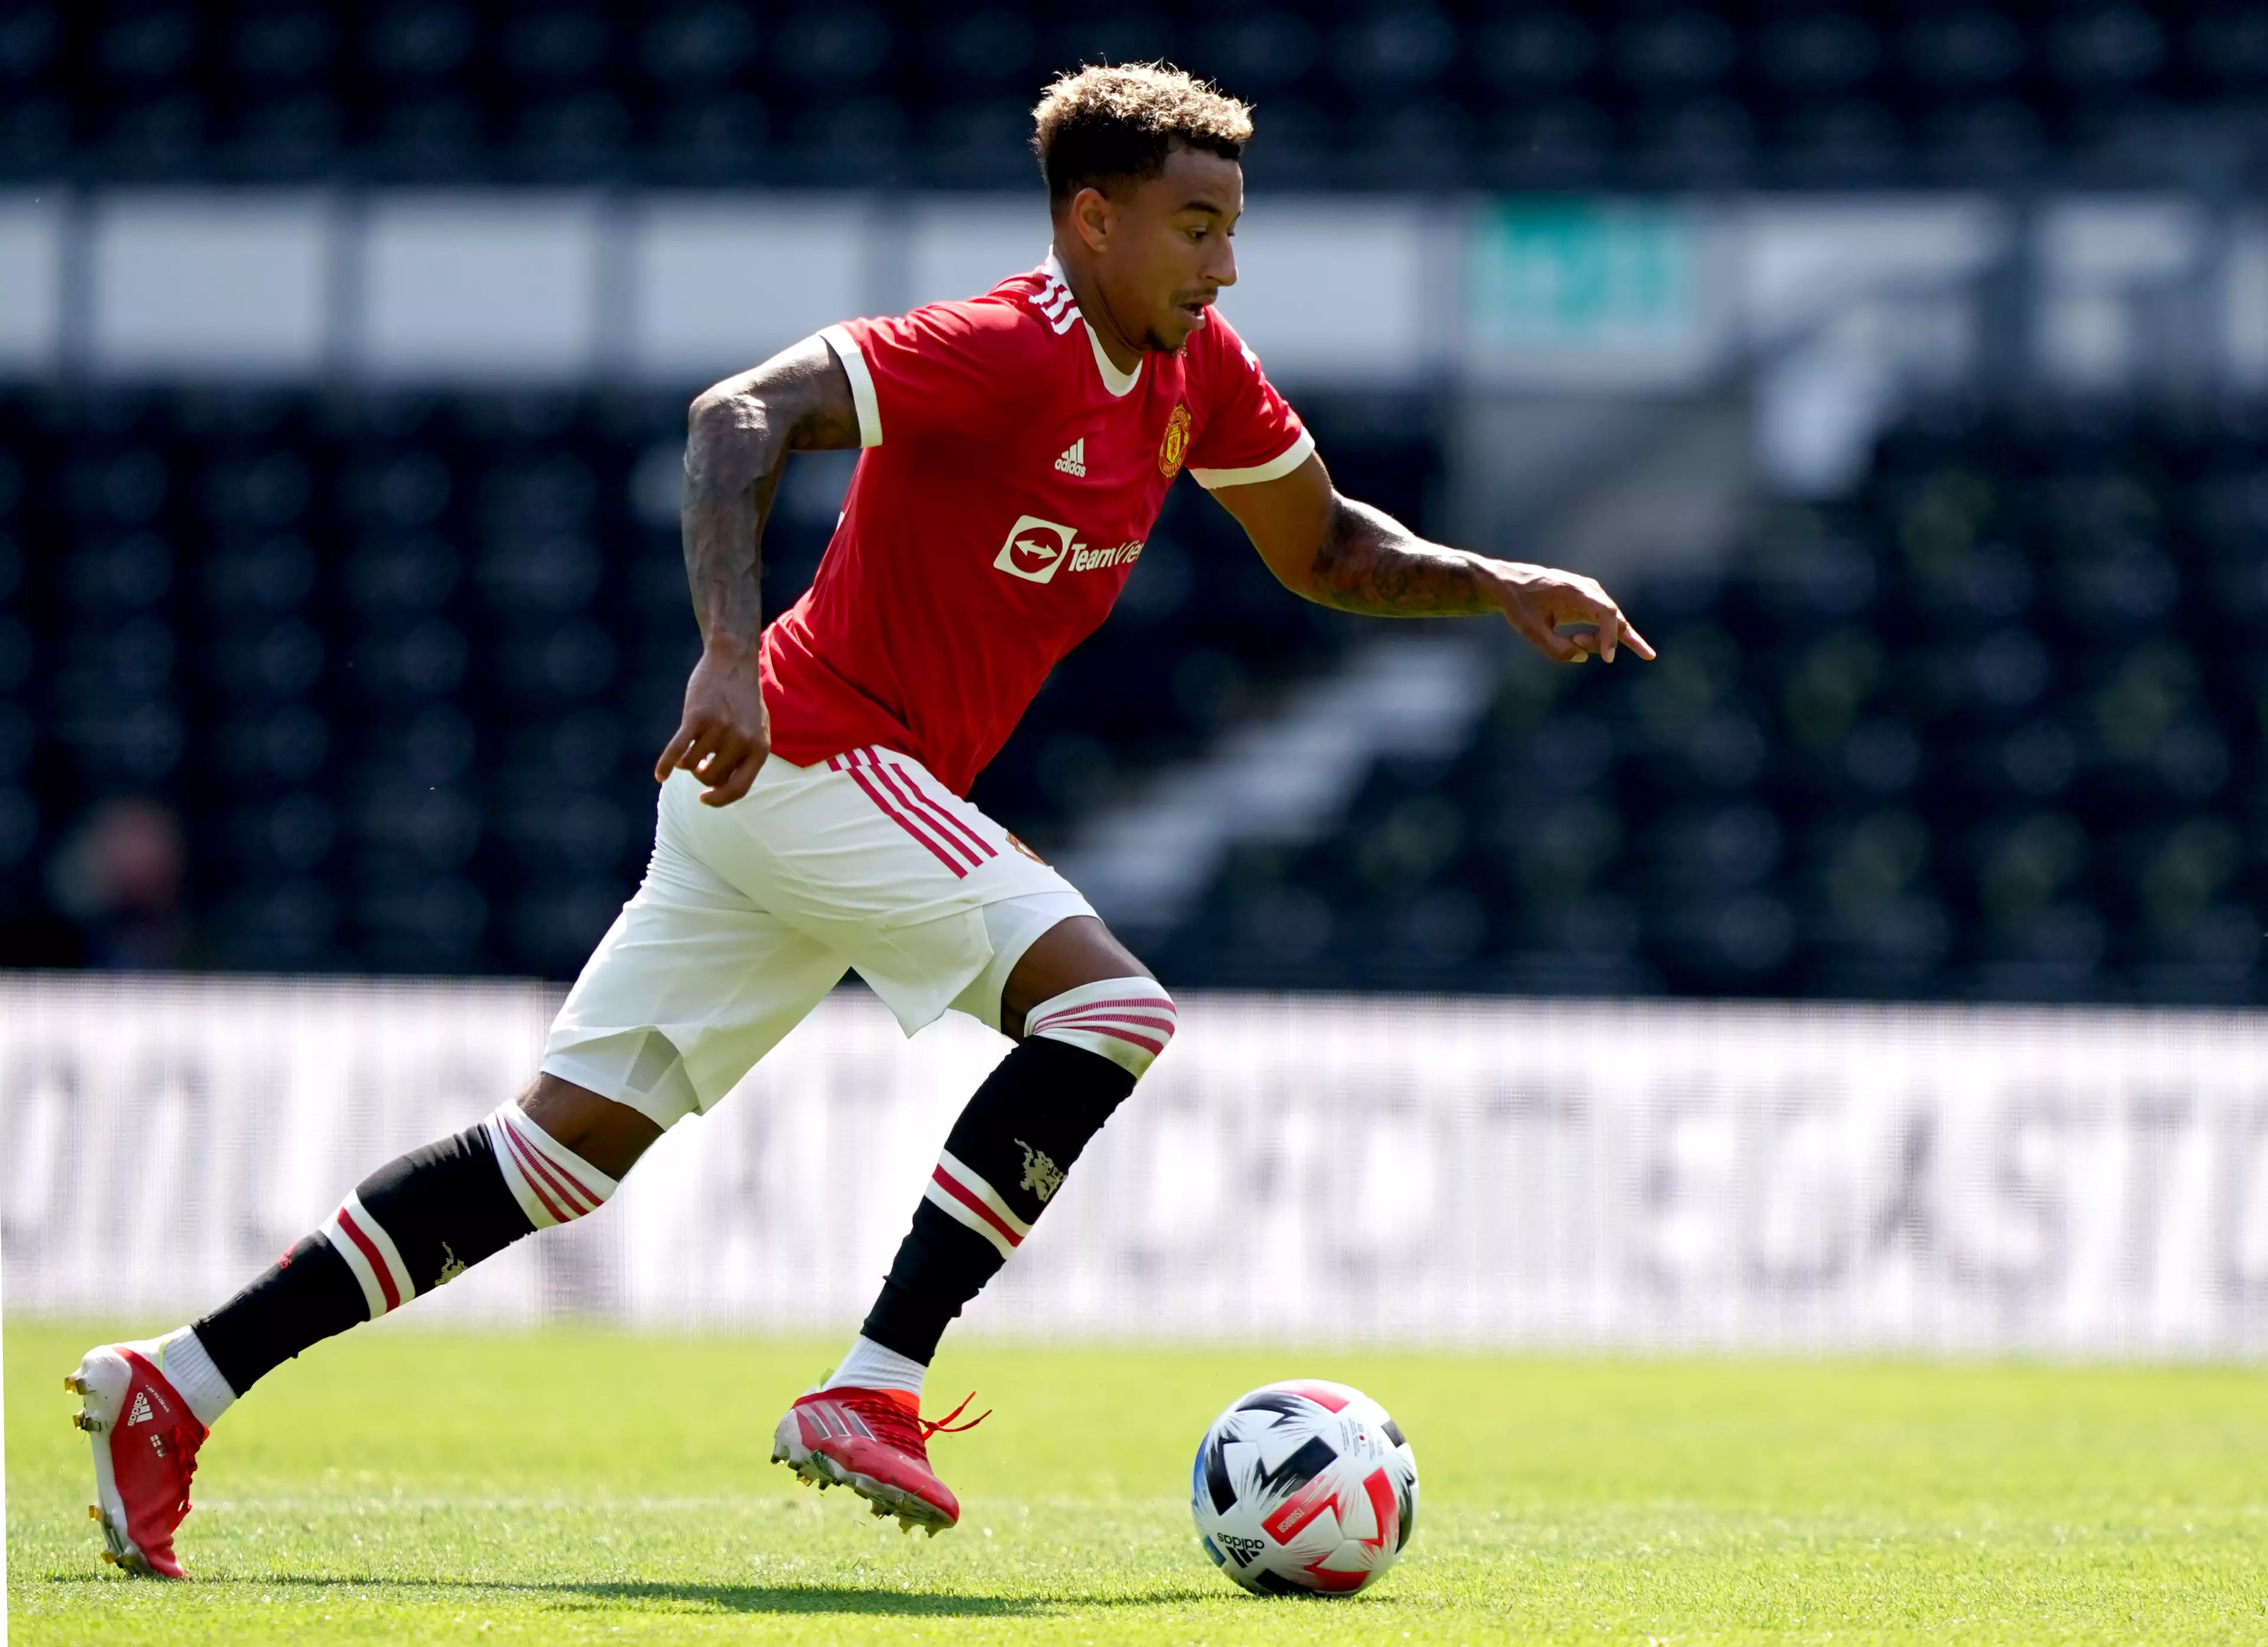 Jesse Lingard featured in Manchester United's pre-season win against Derby on Sunday. Image credit: PA